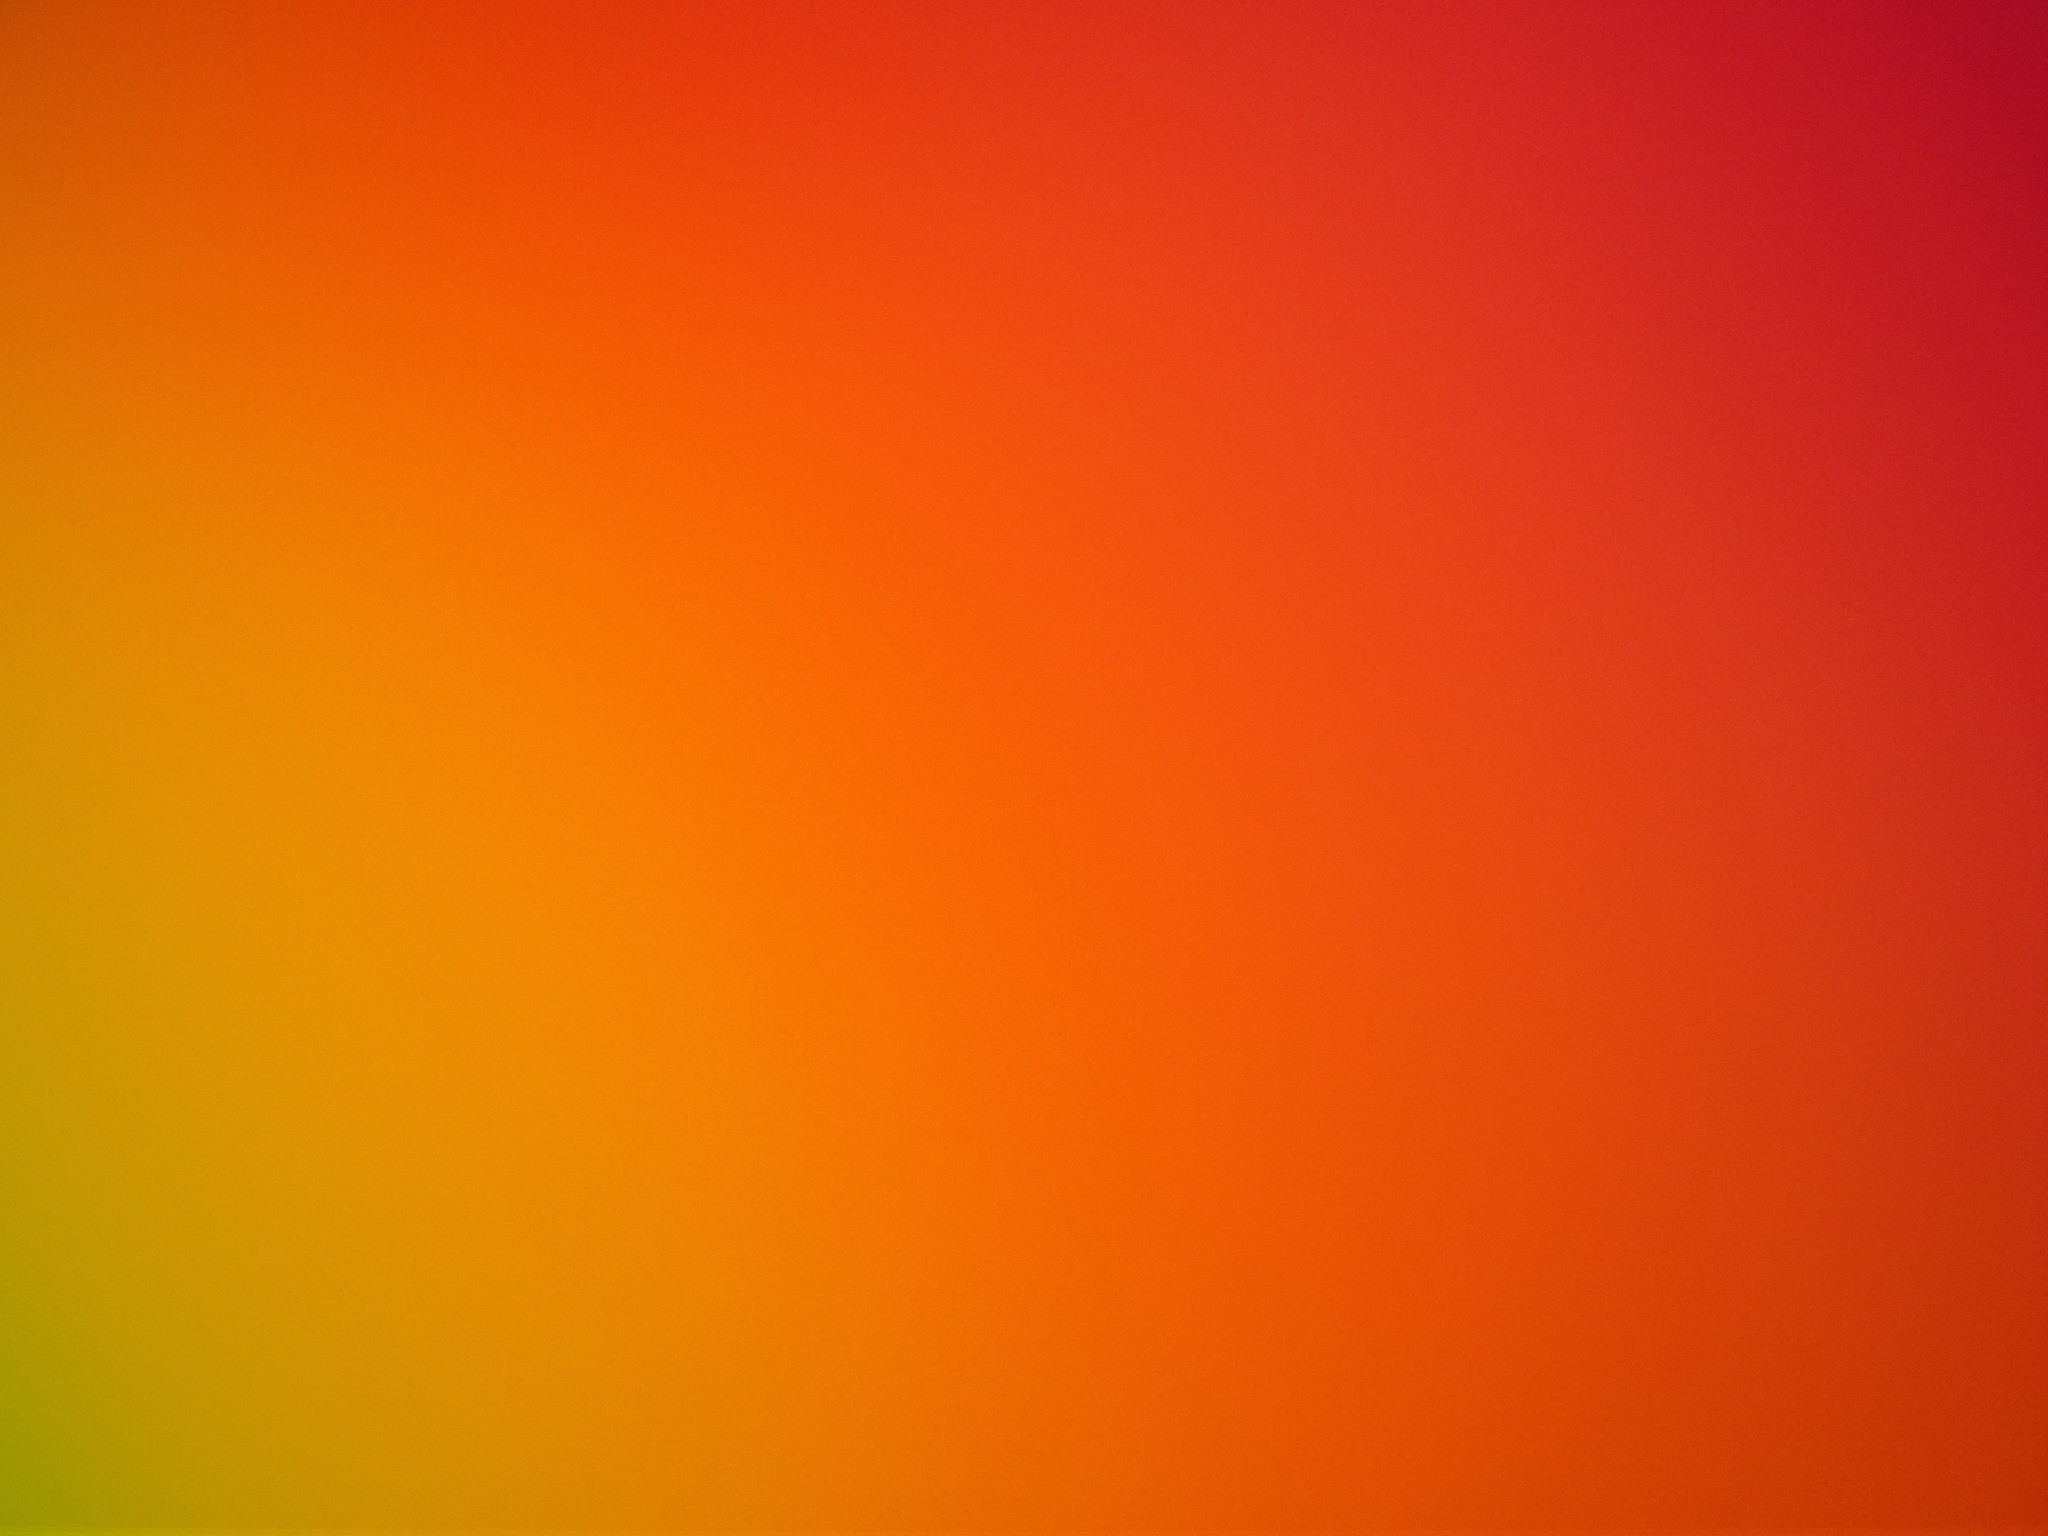 Color gradient background suggesting spirituality, serenity, energy and luxury